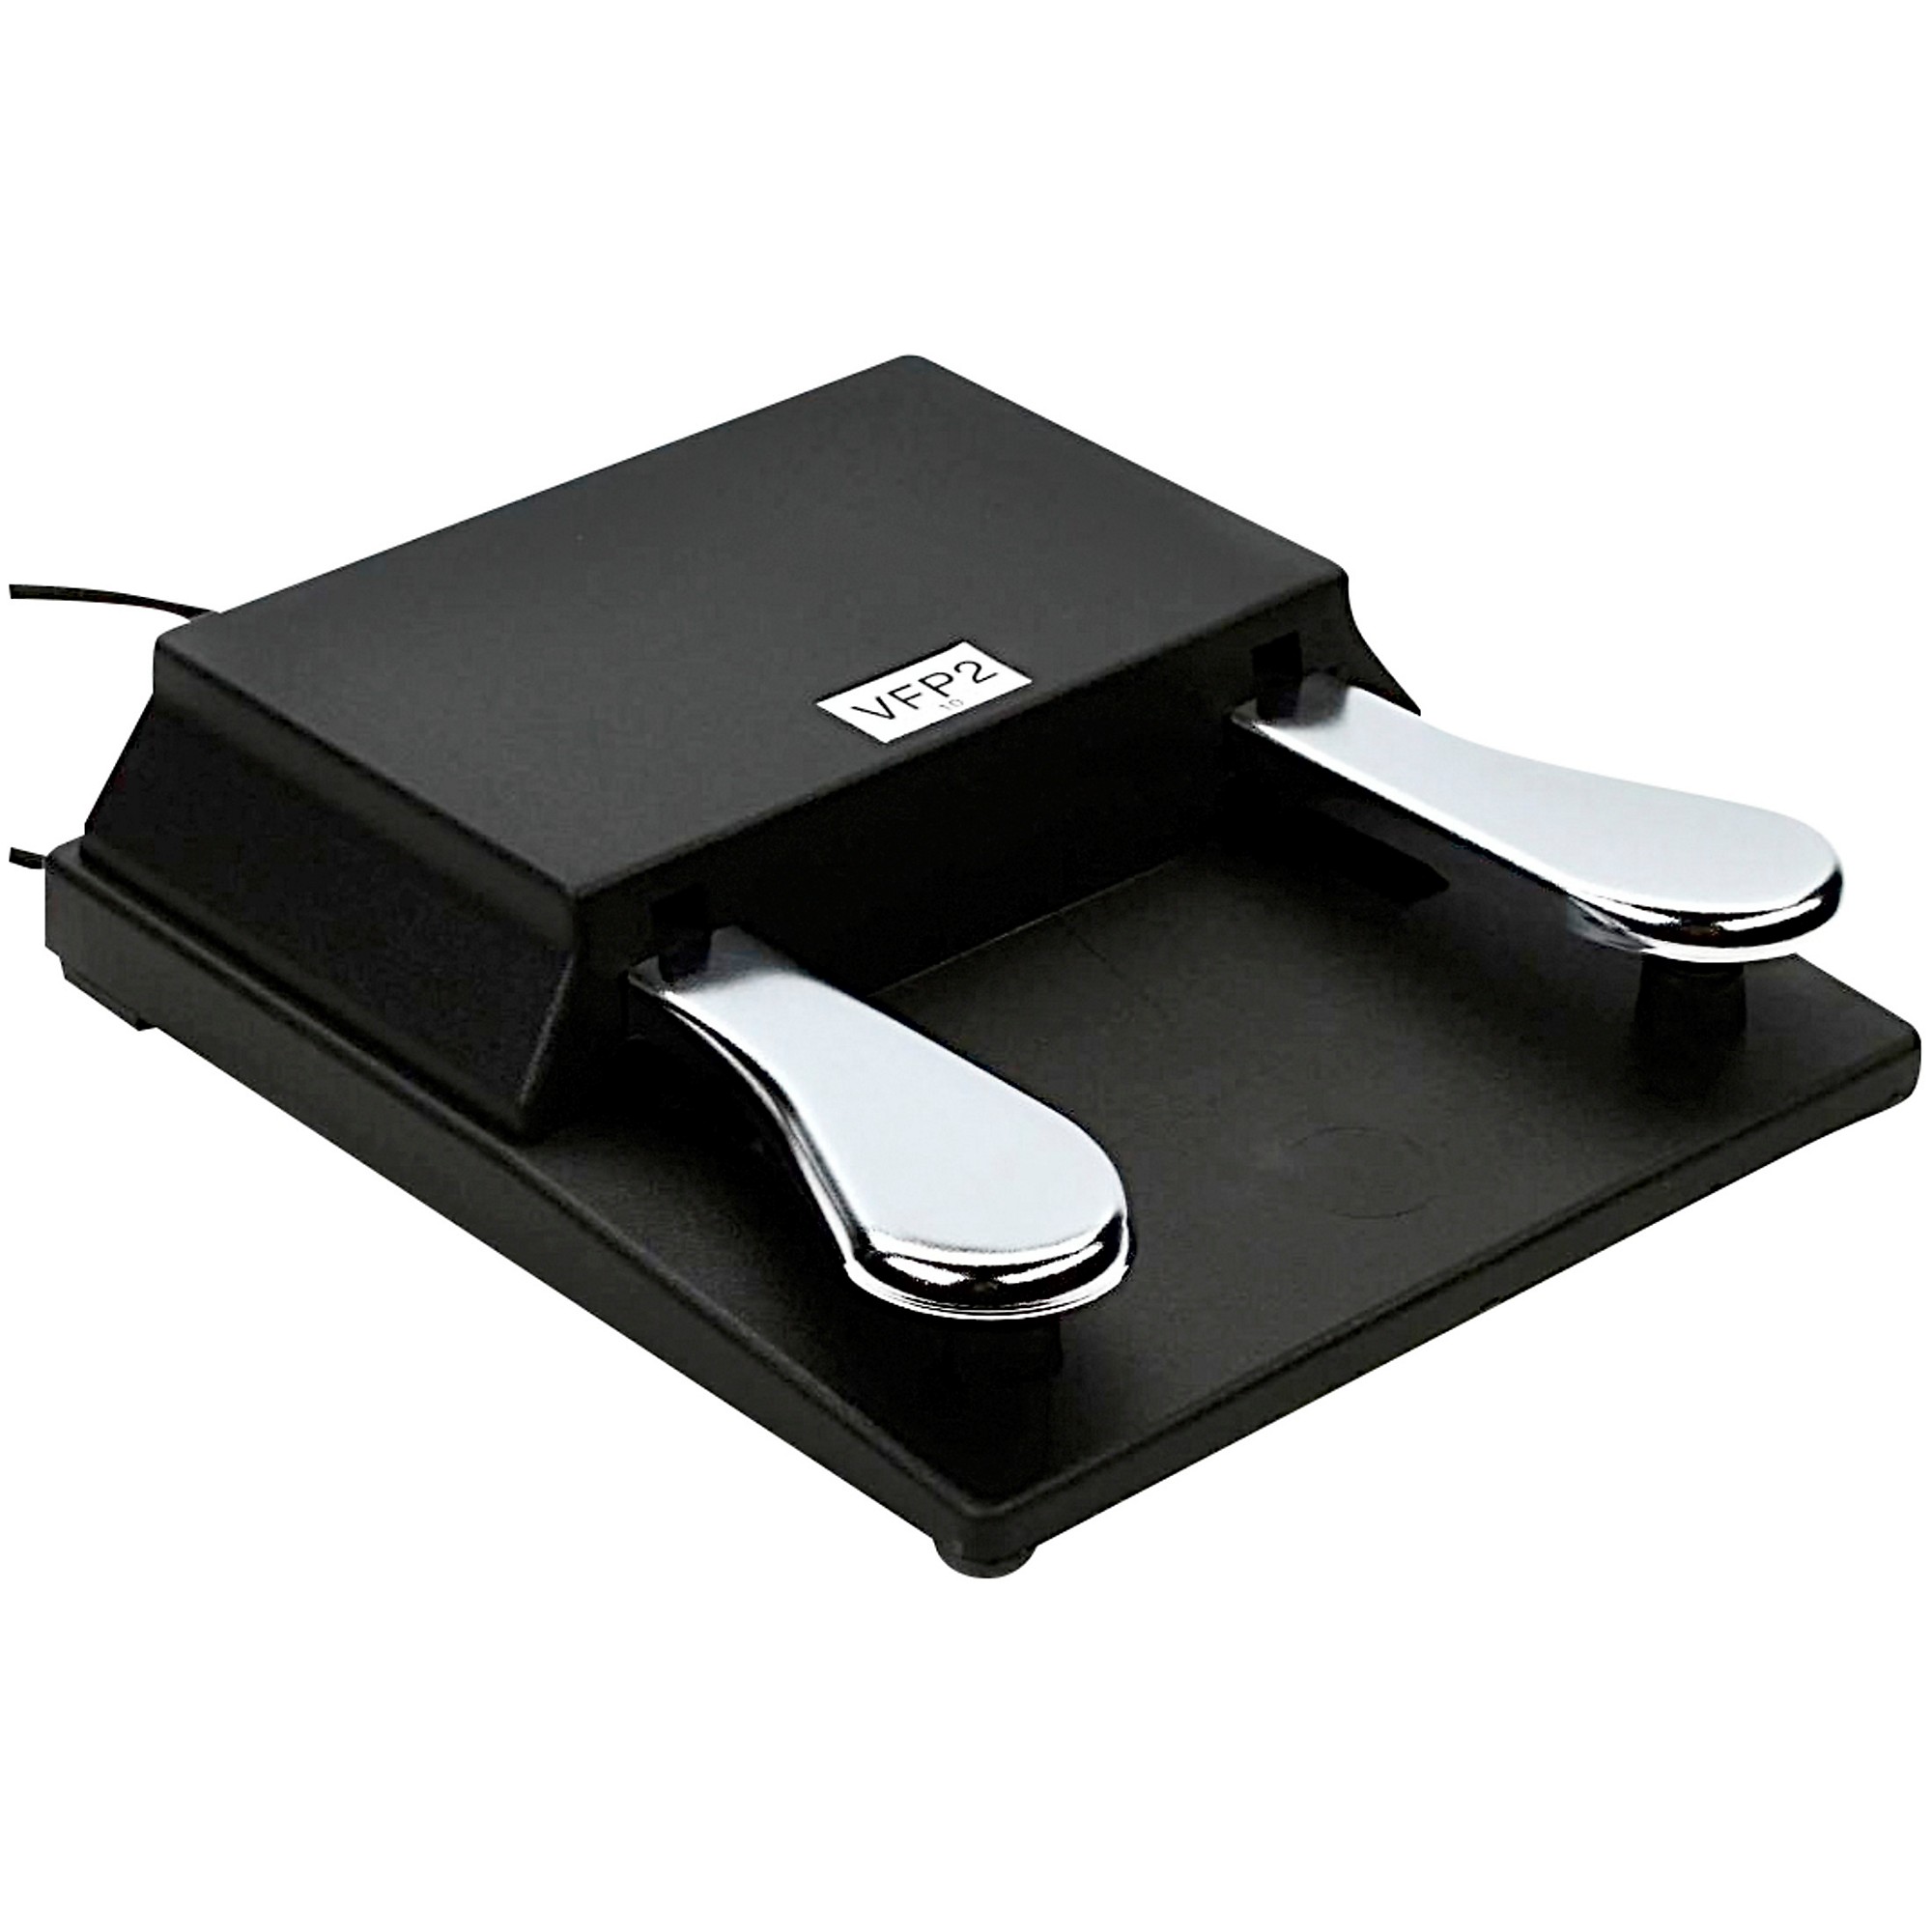 Proline PSS10 Universal Metal Sustain Pedal with Polarity Switch